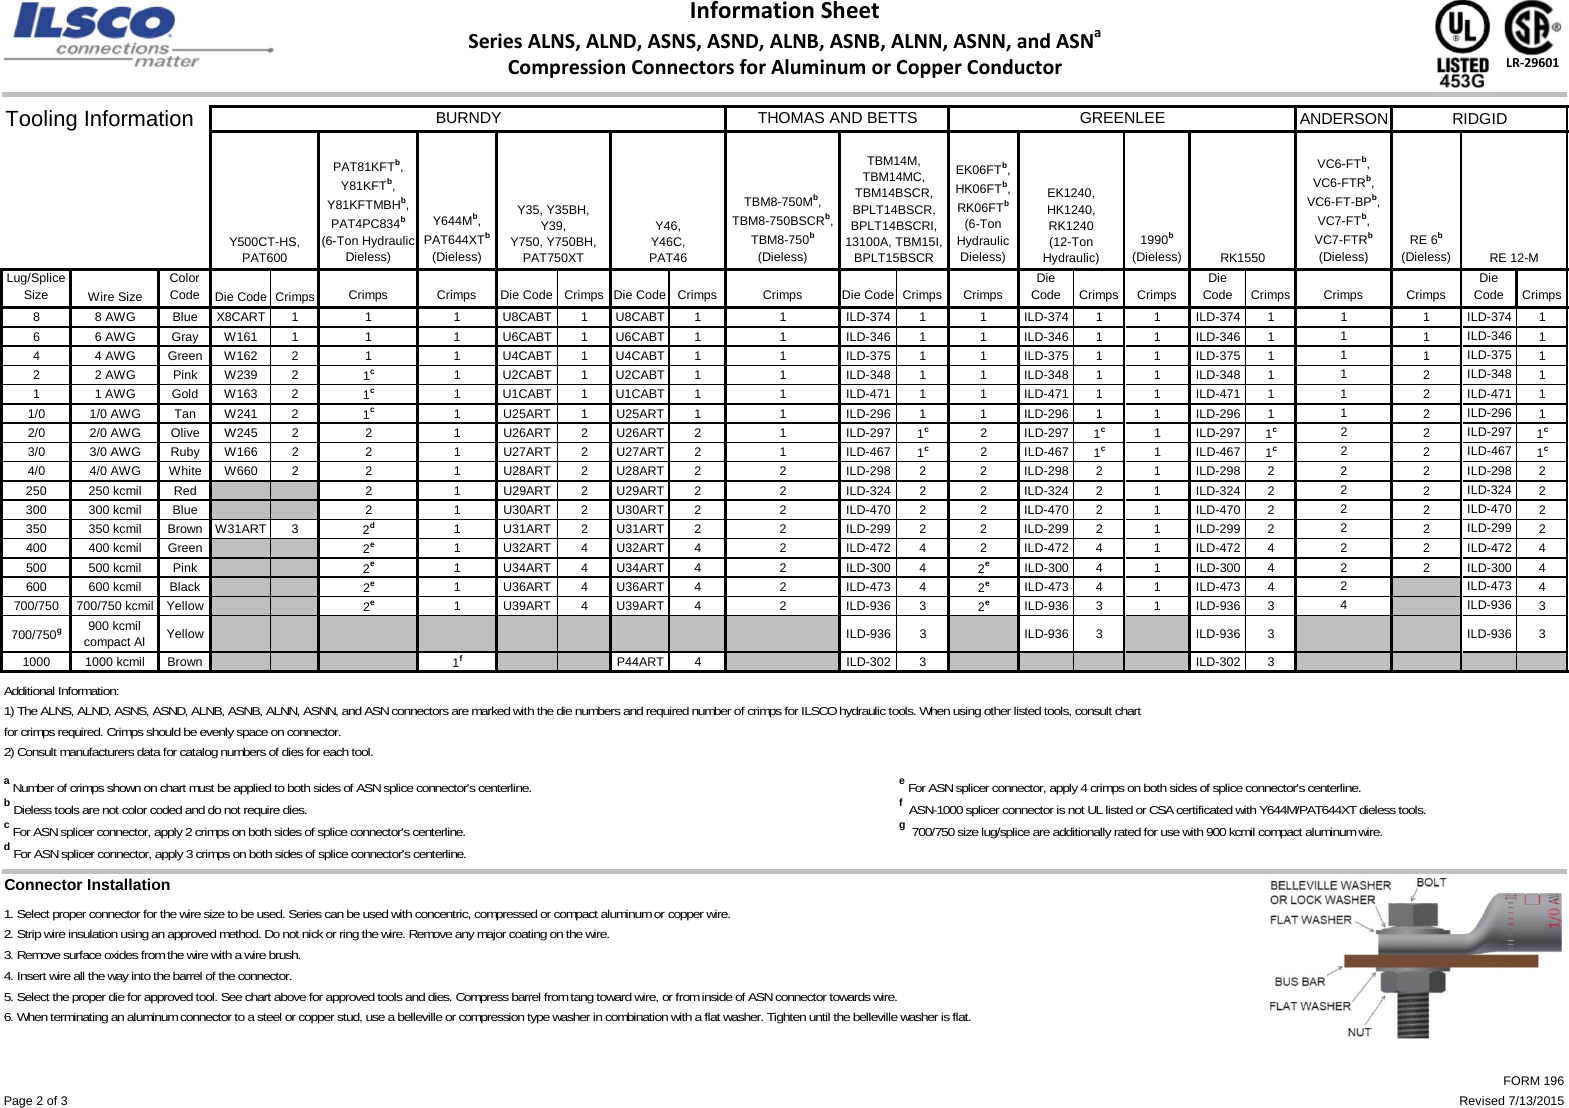 Page 2 of 9 - FORM 196 ALN, ASN COMPRESSION 7-13-2015x  Brochure